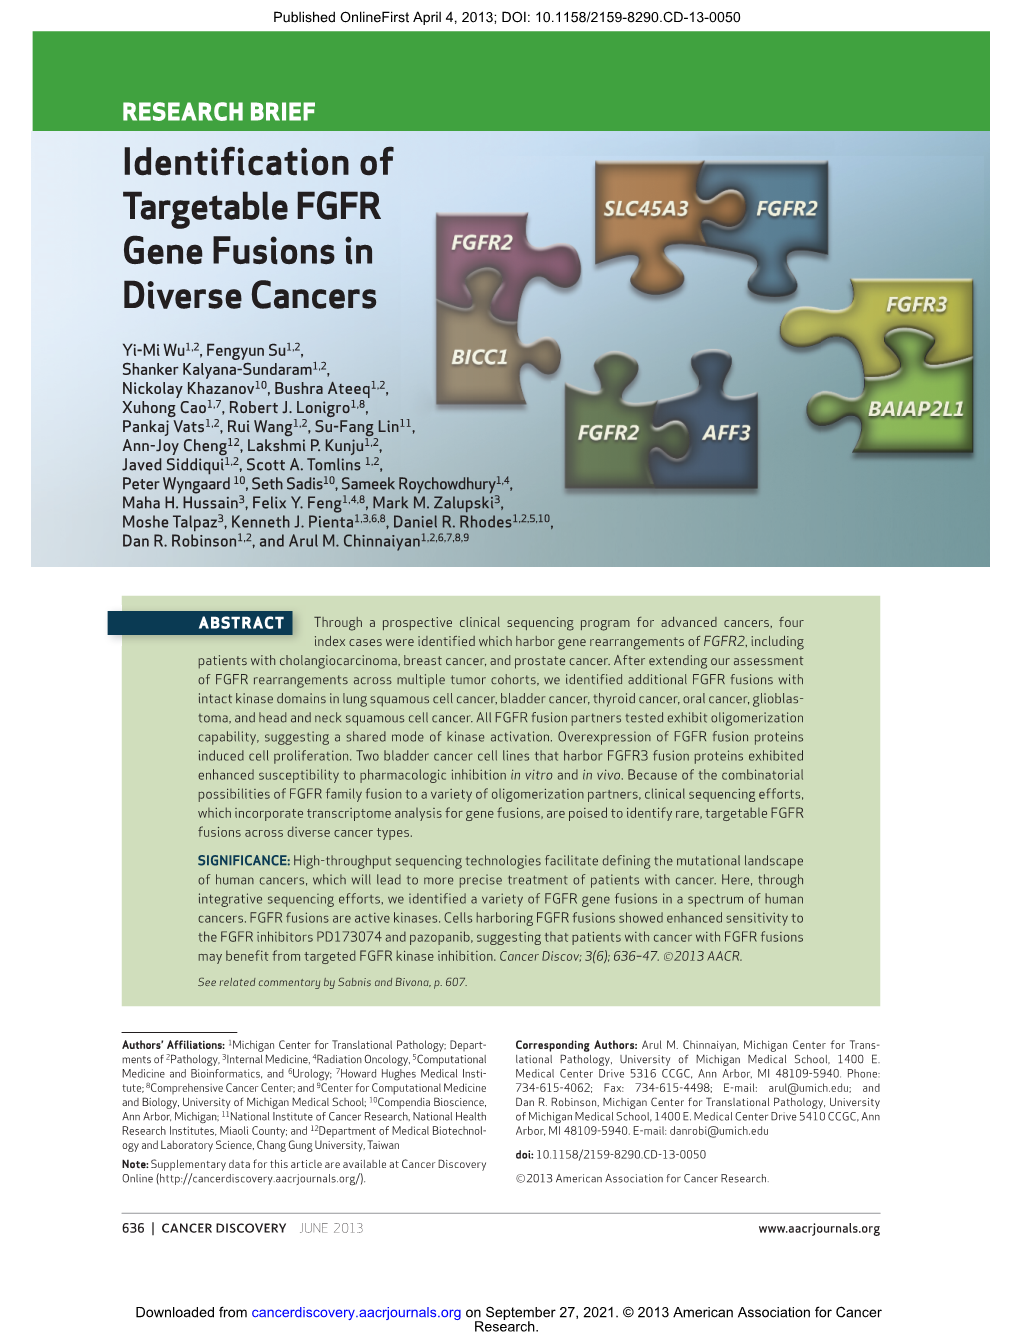 Identification of Targetable FGFR Gene Fusions in Diverse Cancers